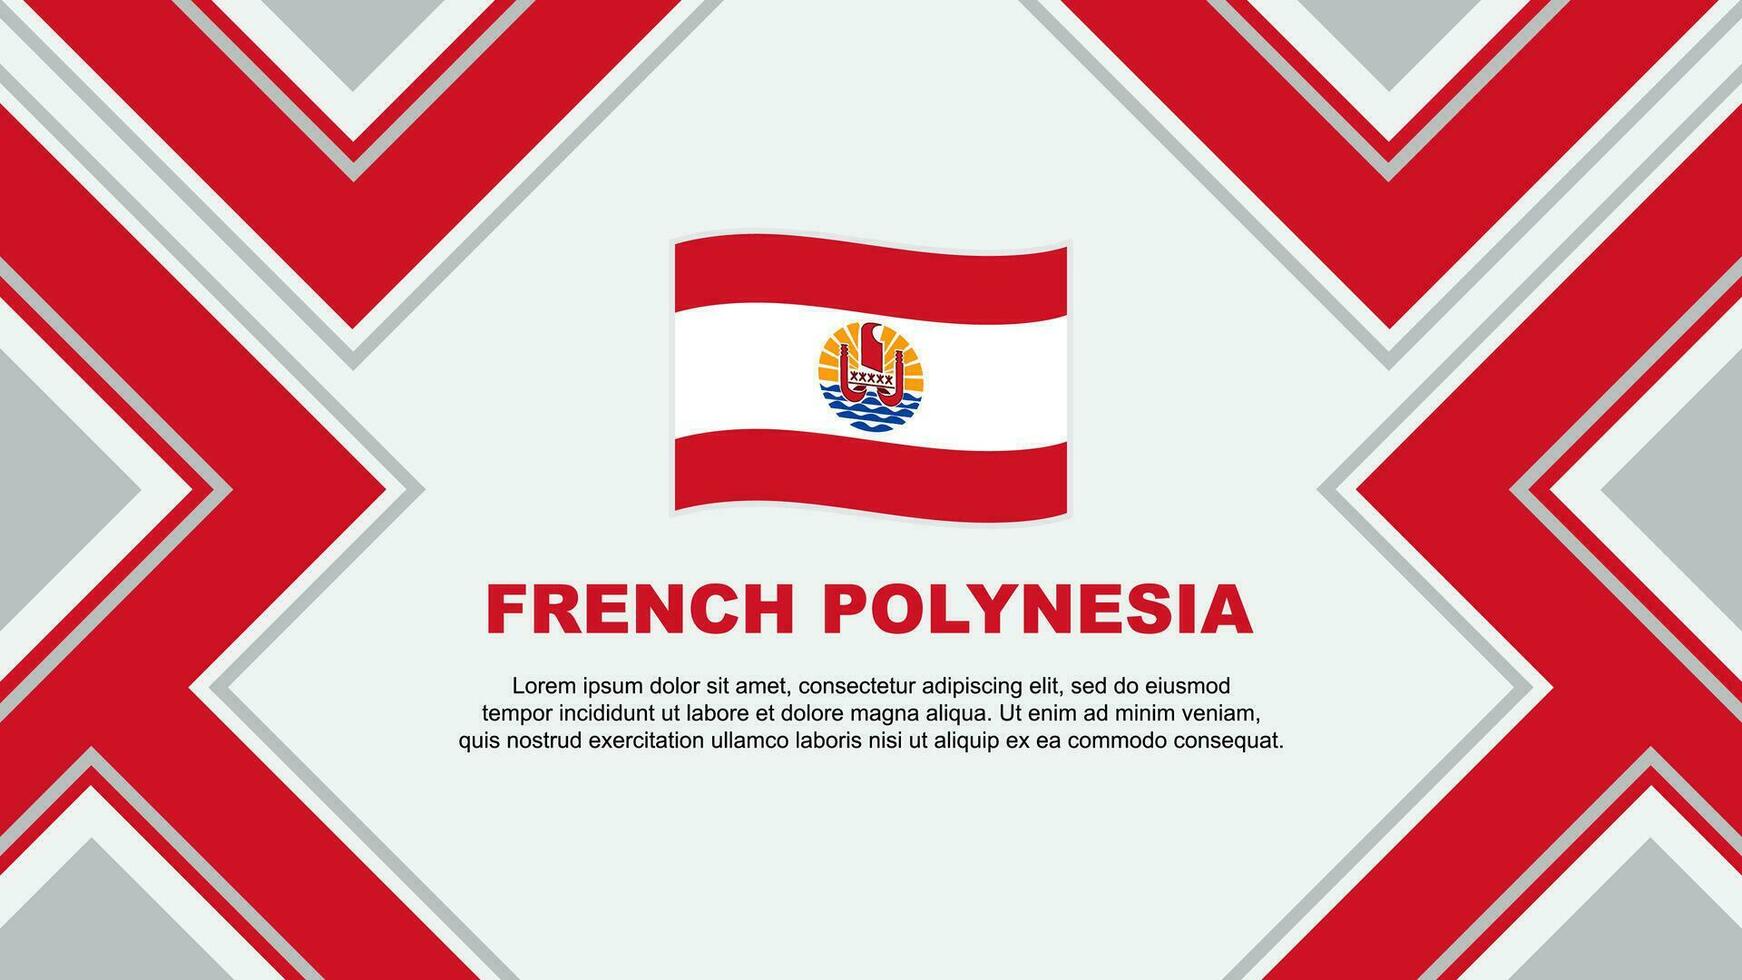 French Polynesia Flag Abstract Background Design Template. French Polynesia Independence Day Banner Wallpaper Vector Illustration. French Polynesia Vector